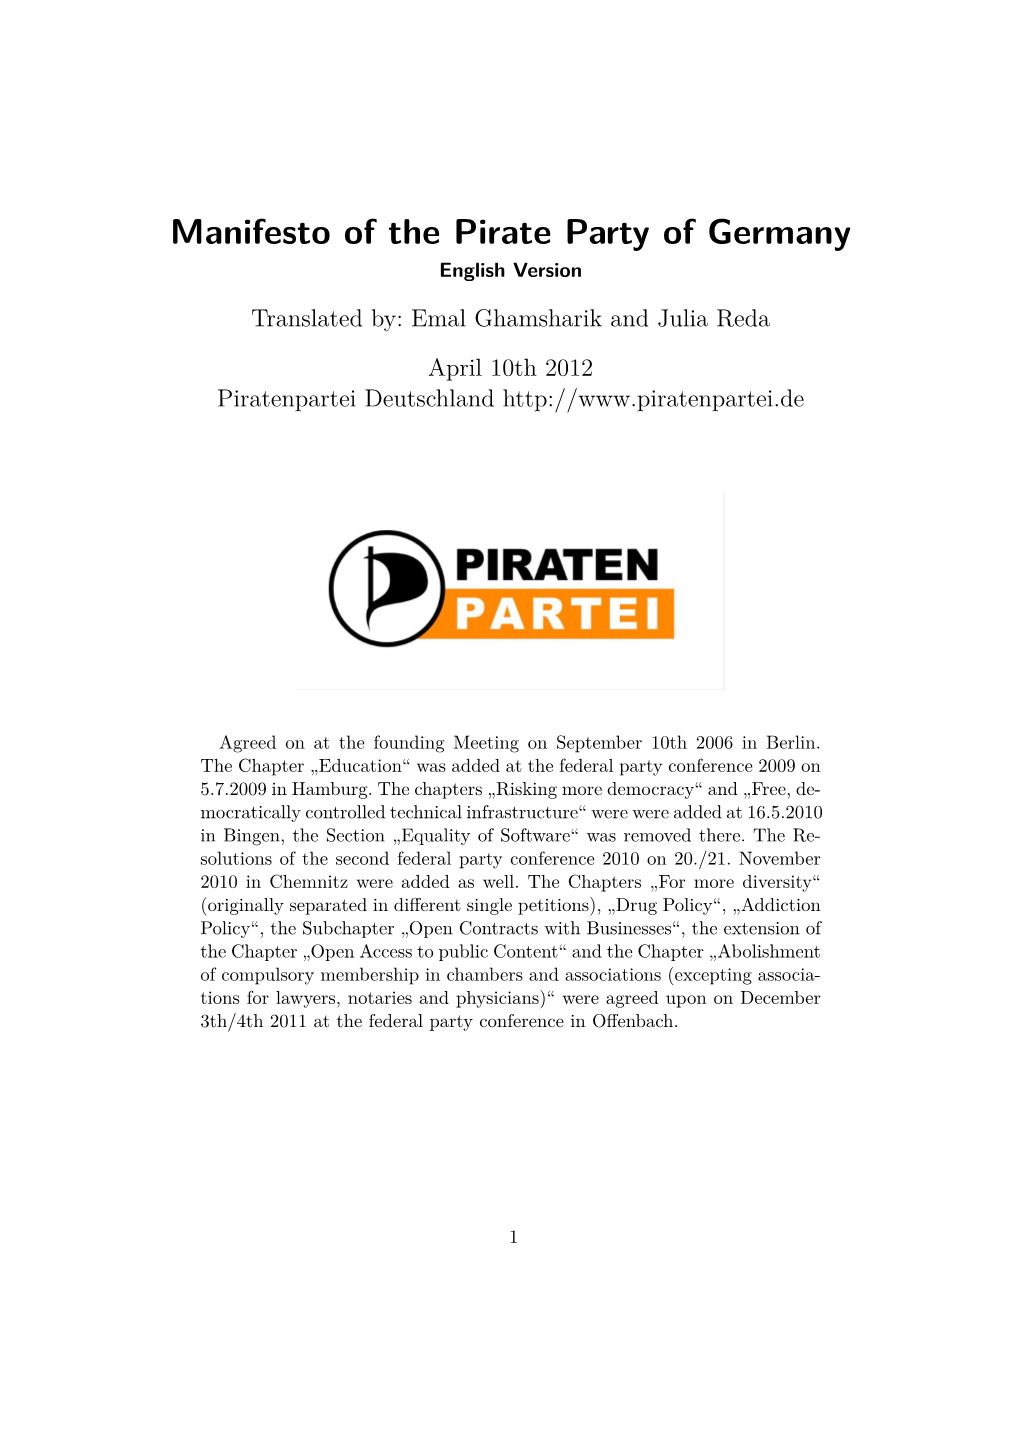 Manifesto of the Pirate Party of Germany English Version